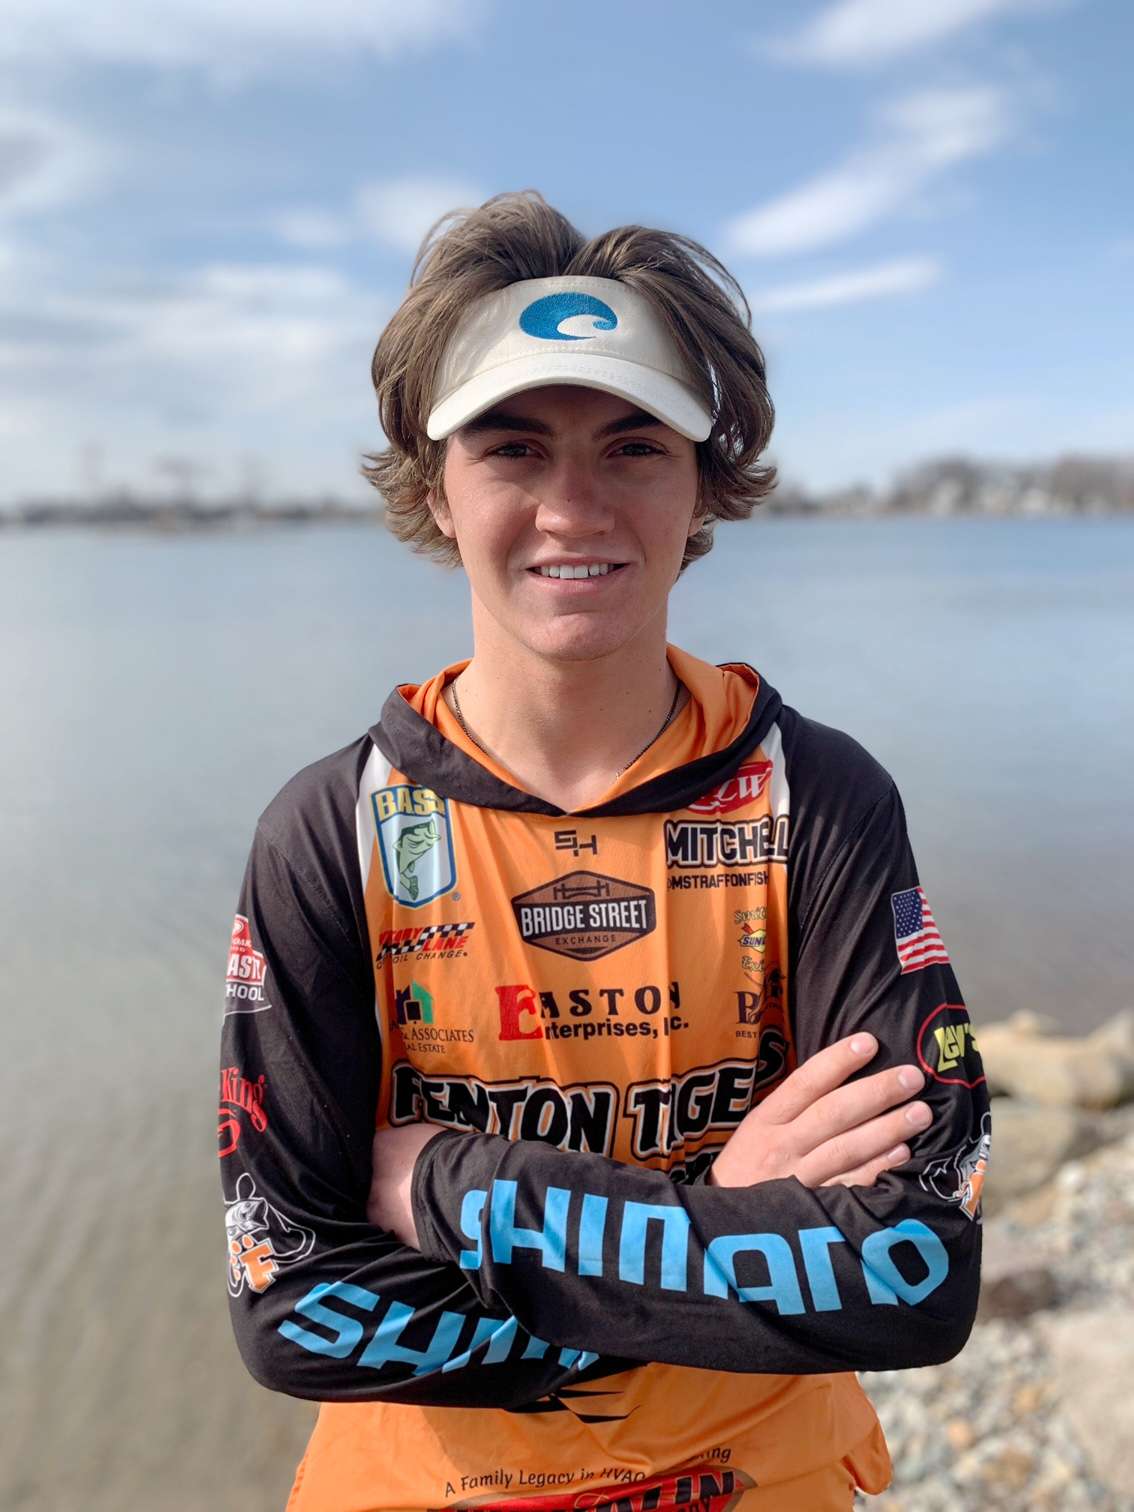 <p><strong>Mitchell Straffon, Fenton, Mich.</strong></p><p>Mitchell Straffon, a junior at Fenton High School, captured three wins during the 2020 season as well as three Top 5 and two Top 20 finishes. Straffon also competed in a local adult-level tournament series, Cash For Bass, where he notched two wins and three Top 5 finishes. He is a two-time Bassmaster High School National Championship qualifier and placed fourth overall in the Michigan B.A.S.S. Nation Team Tournament in 2020. Vera Hazlett, a teacher at Fenton High School, says, âMitchell is always willing to take the lead in the discussion and encourage his classmates to participate. This is typical of Mitchellâs dedication to his commitments; he is thorough and dedicated to quality and meaning.â In 2020, Straffon volunteered at the Michigan Ultimate Fishing Show and several Bassmaster Elite Series events as well as with the Fenton Fire Department Food Pantry. Alongside fishing and volunteer work, Straffon works a part-time job and plays on his high schoolâs junior varsity golf team, all whilst maintaining a 3.76 GPA.</p>